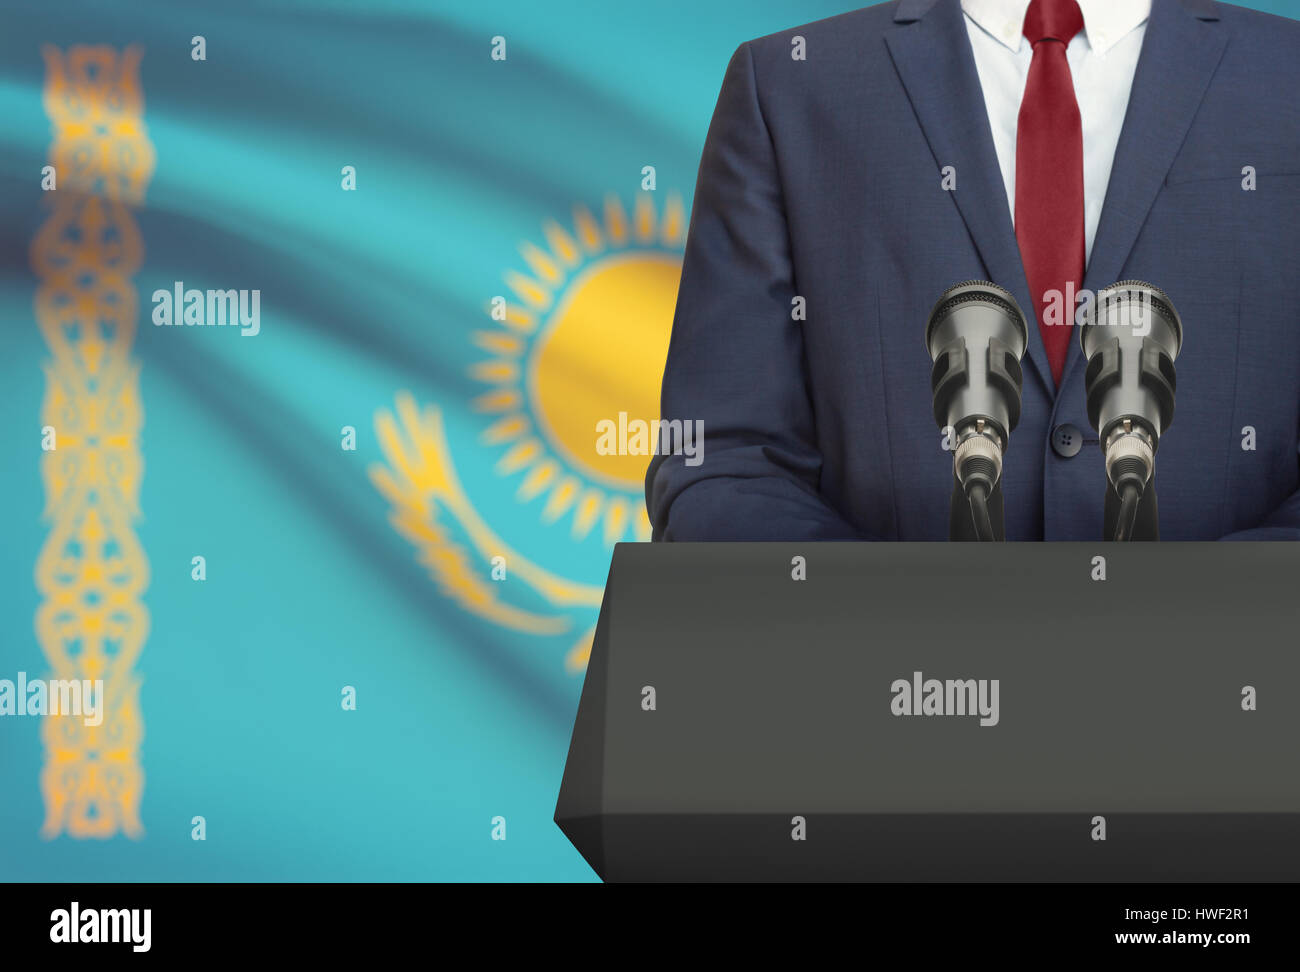 Businessman or politician making speech from behind the pulpit with national flag on background - Kazakhstan Stock Photo